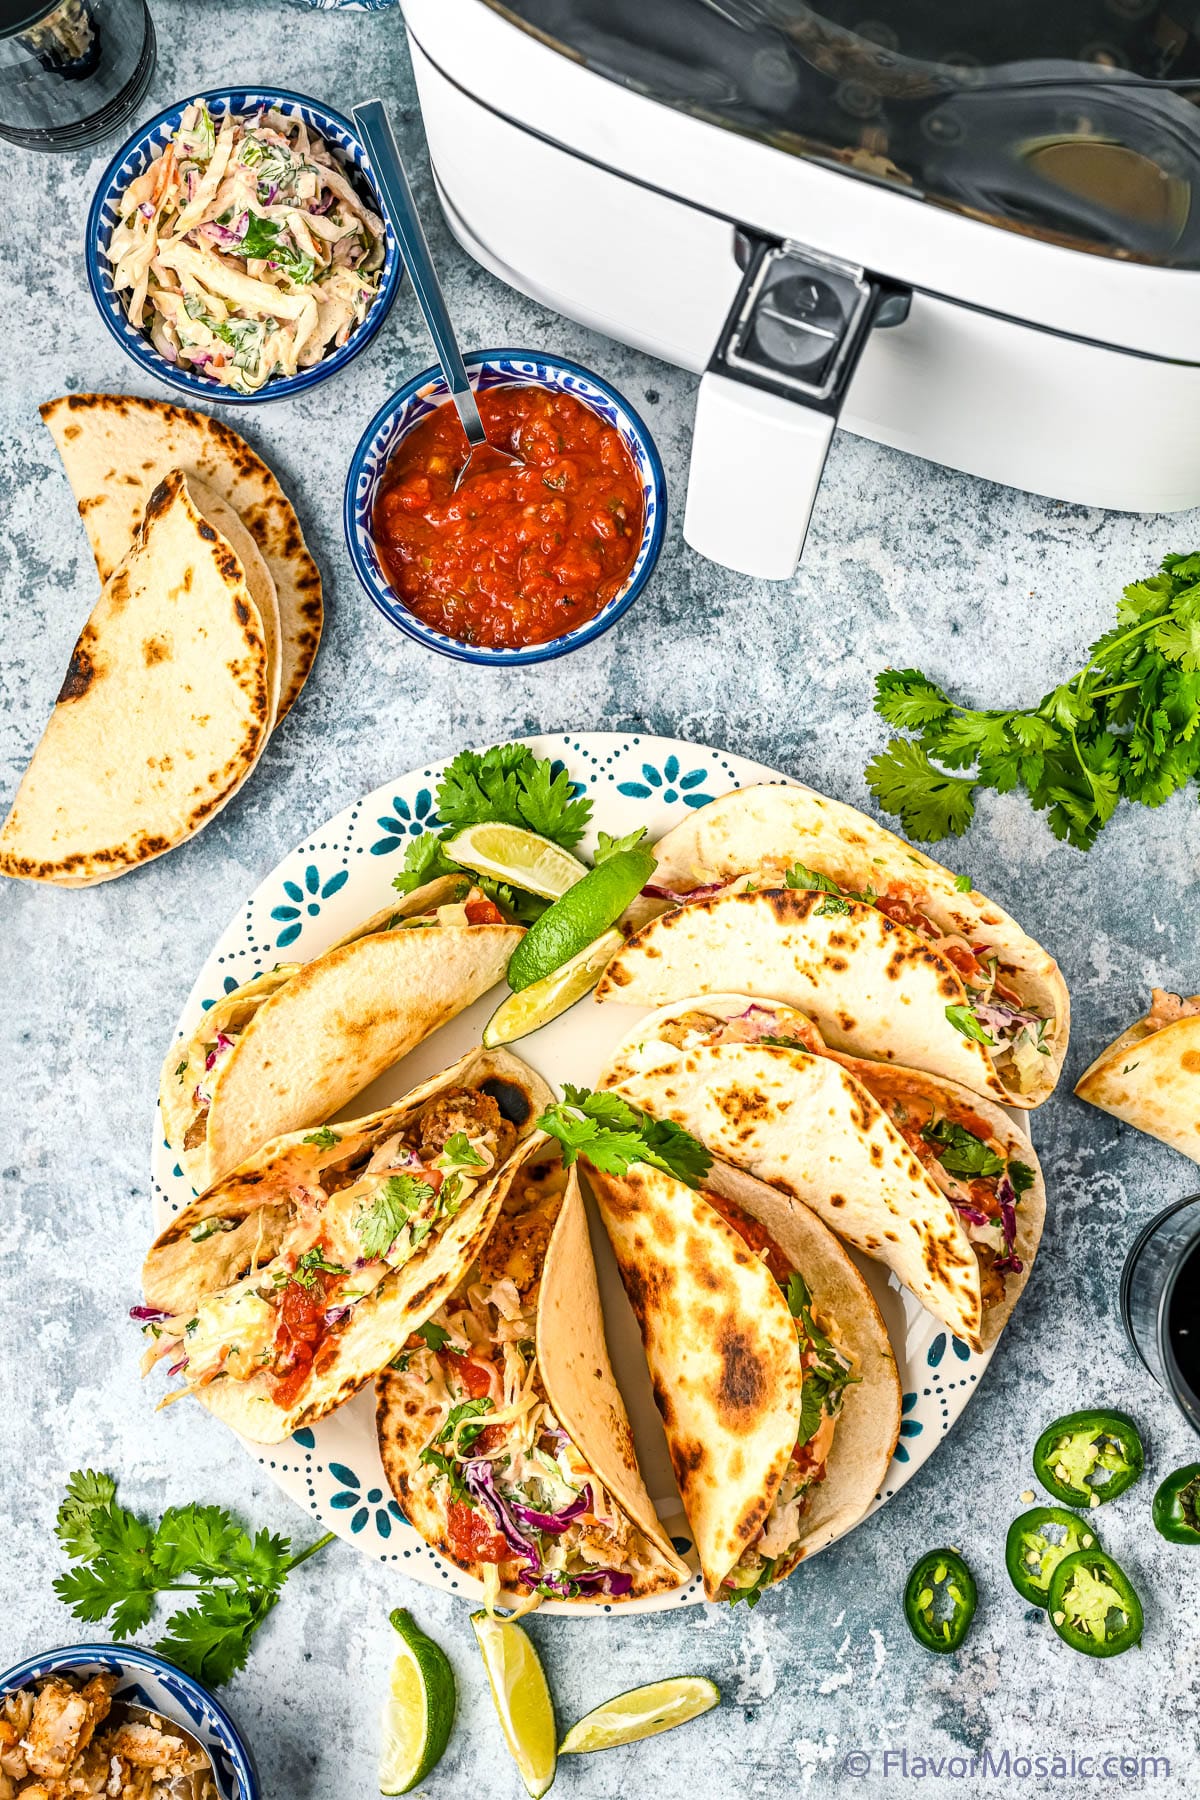 Overhead view of a blue plate with blue decorative edges with 6 air fryer fish tacos on a blue and white cement like background, surrounded by sprigs of cilantro, slimed limes, sliced jalapenos, flour tortillas, a small bowl of red salsa, another small bowl of cilantro lime slaw and a partial view of an air fryer.